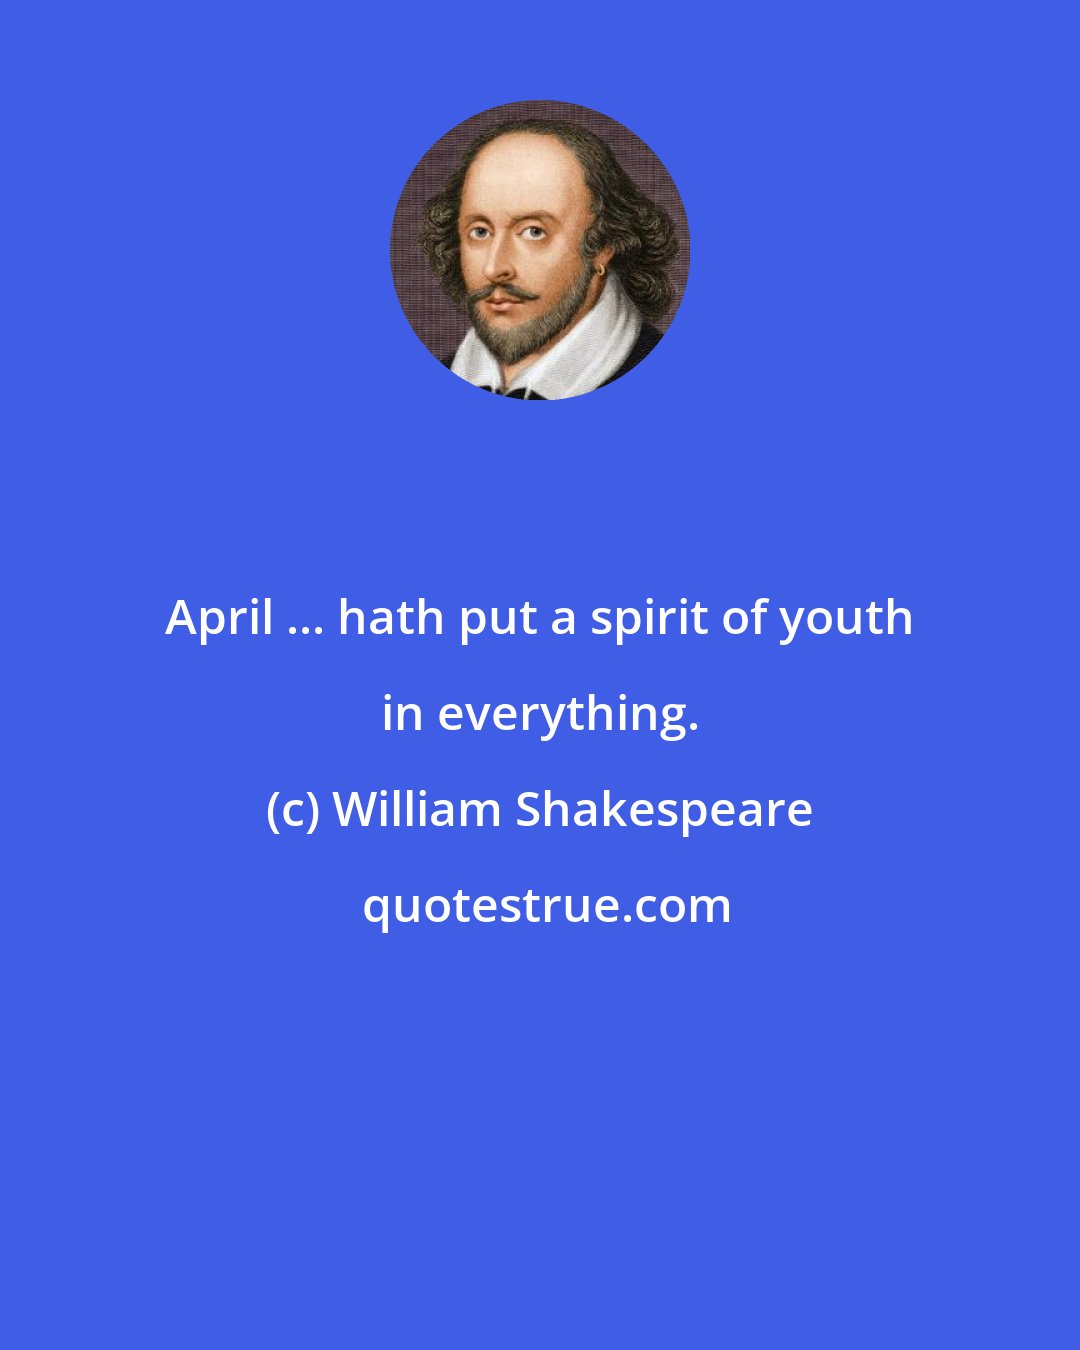 William Shakespeare: April ... hath put a spirit of youth in everything.